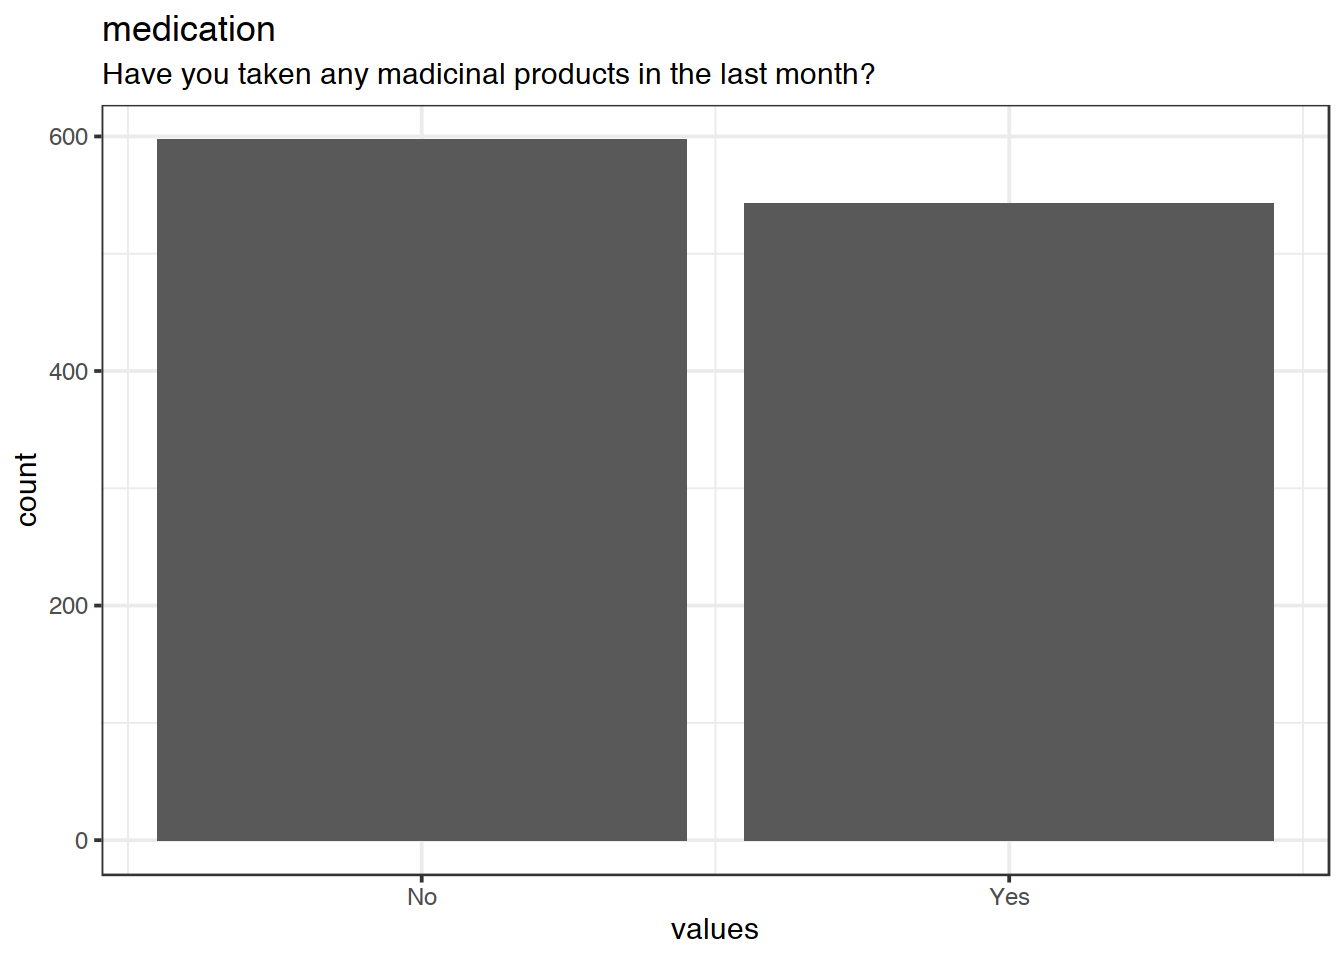 Distribution of values for medication